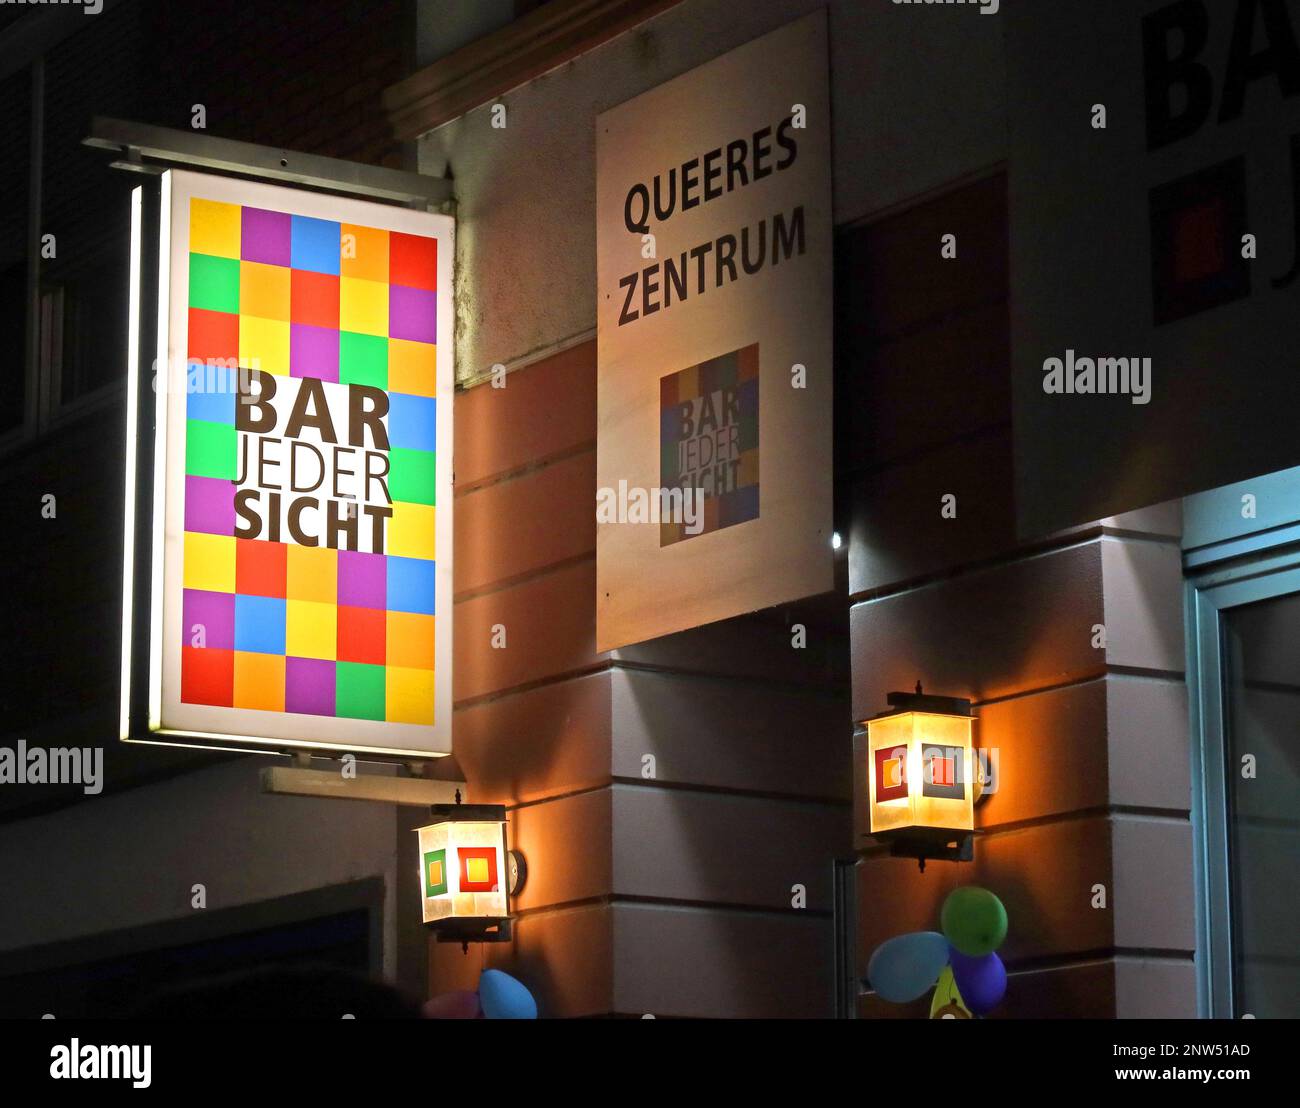 Bar Jeder Sicht - Everyone's point of view,  Queer Central, Hintere Bleiche 29, 55116 Mainz, Germany Stock Photo